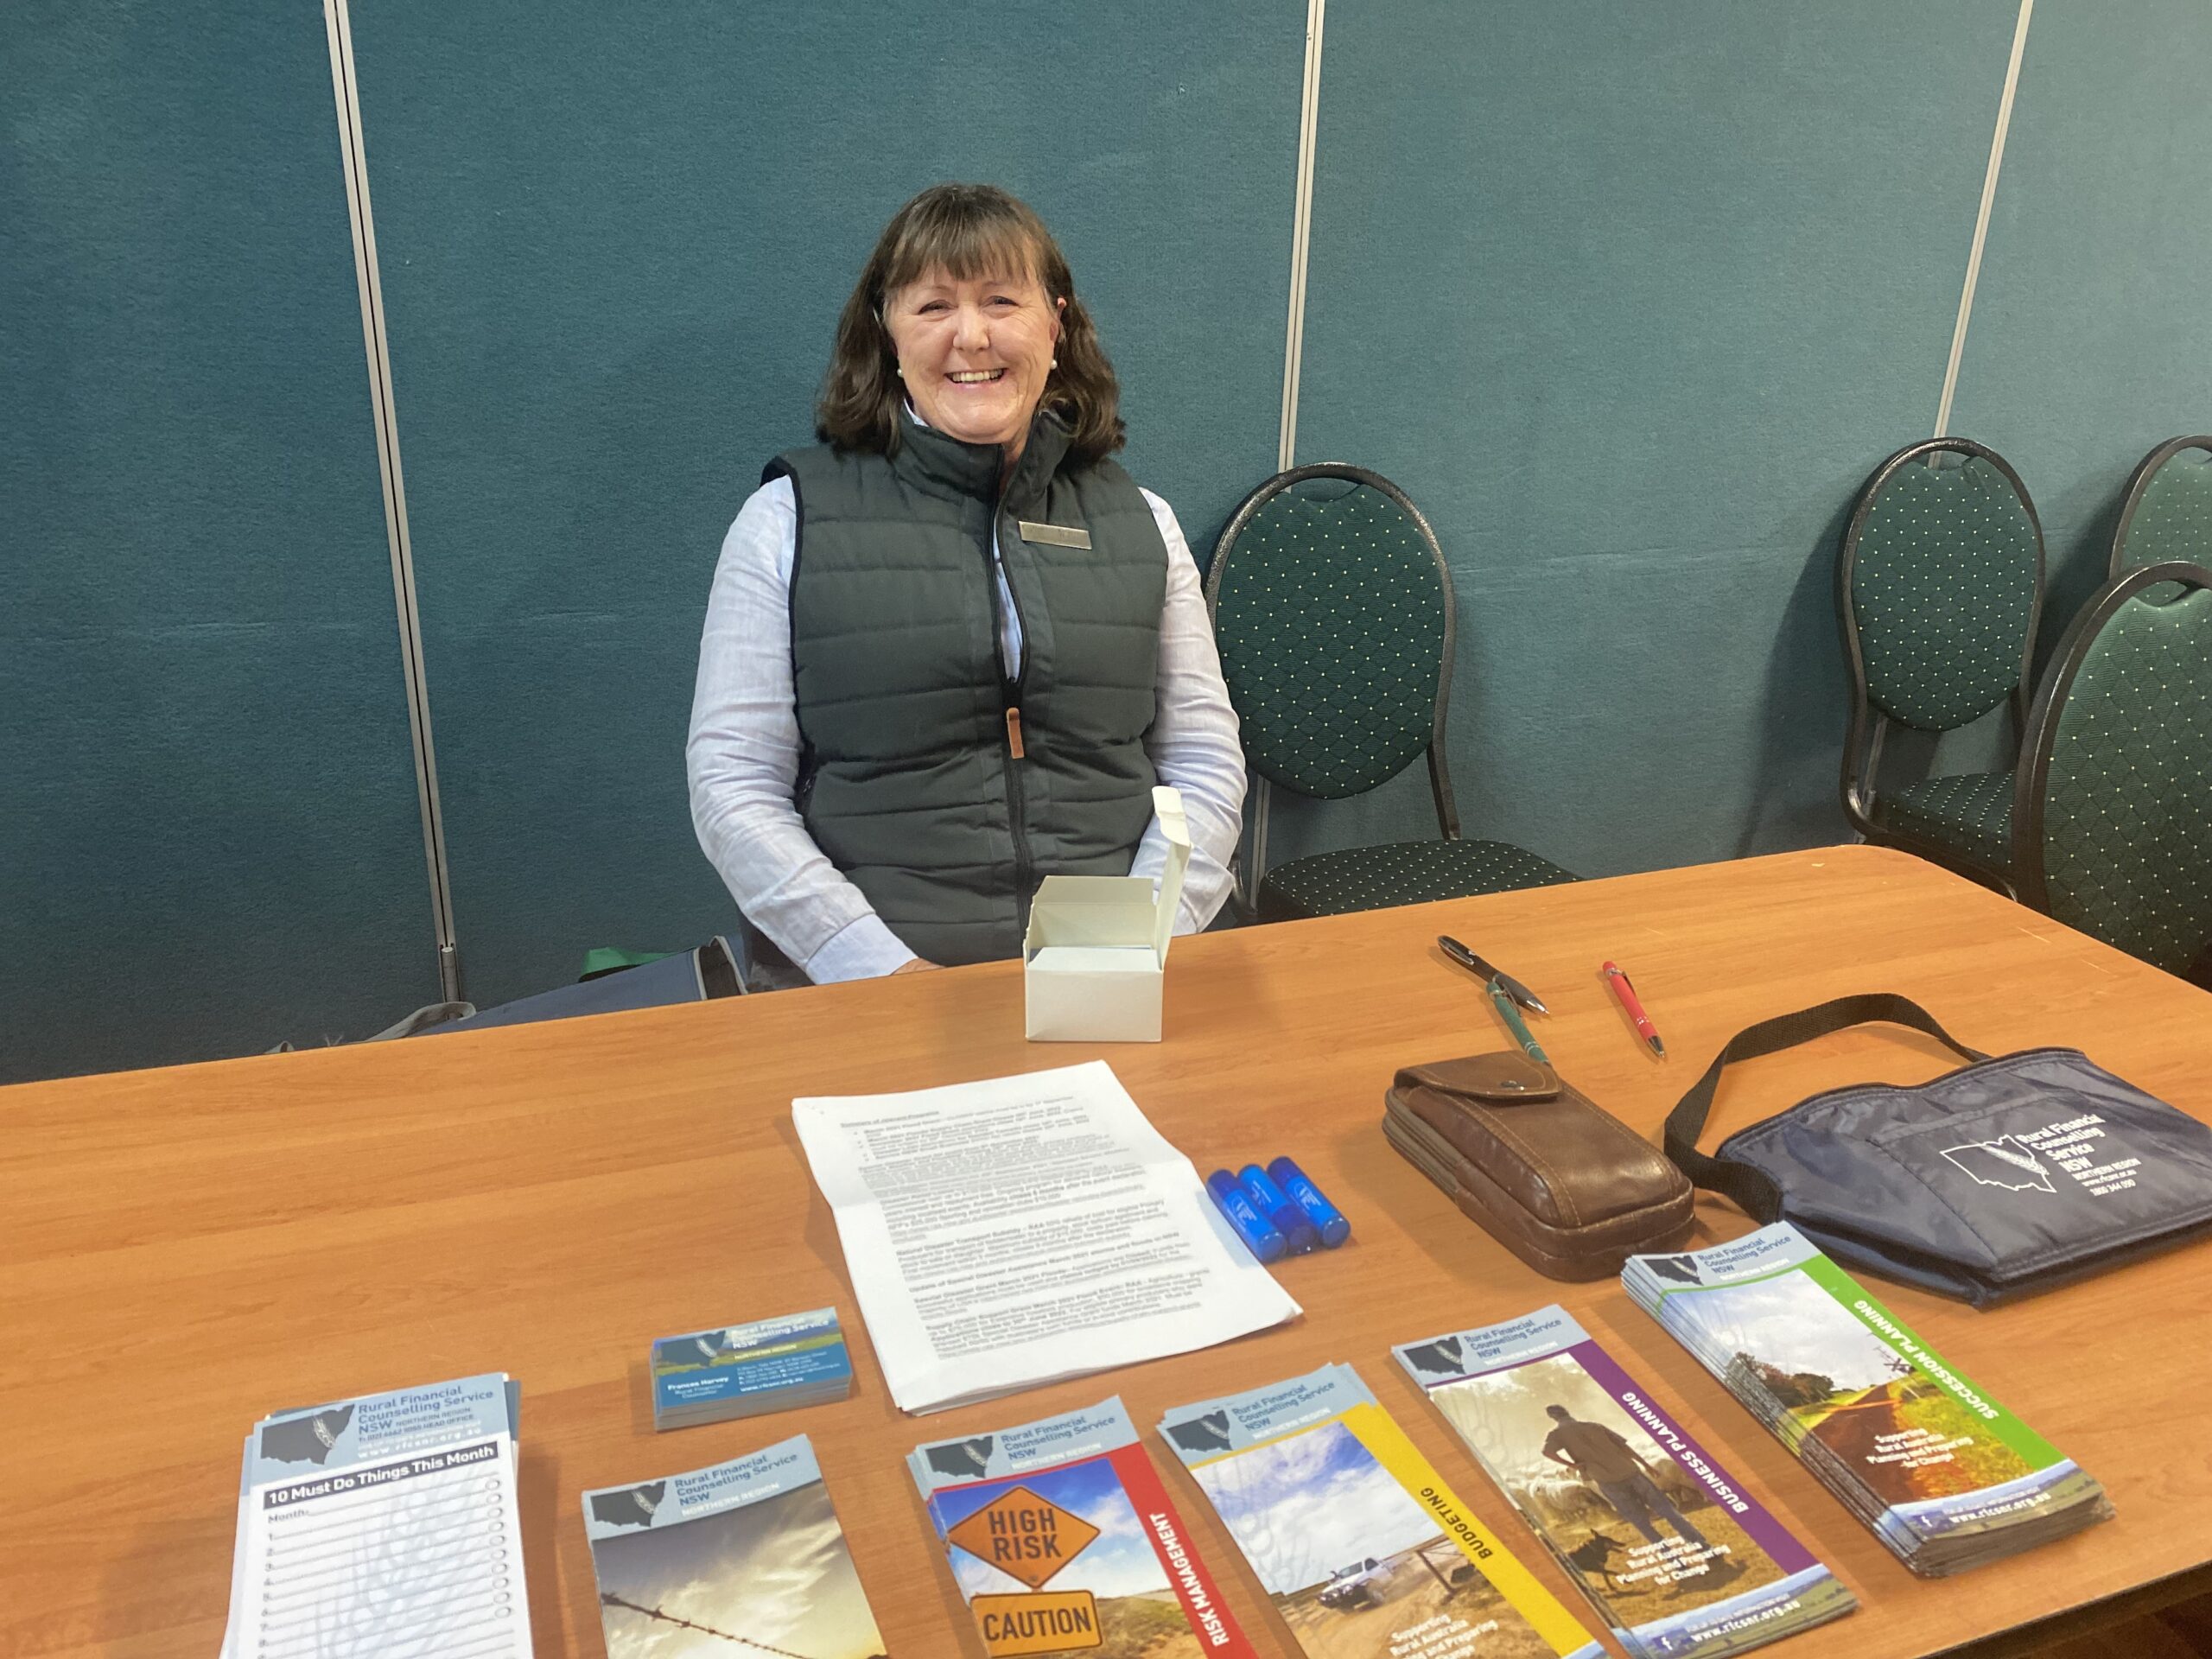 Frances Harvey from the Rural Financial Counselling Service NSW. As well as the comedy show, there were support service providers at the Wee Waa Bowling club on Wednesday night to chat to locals.